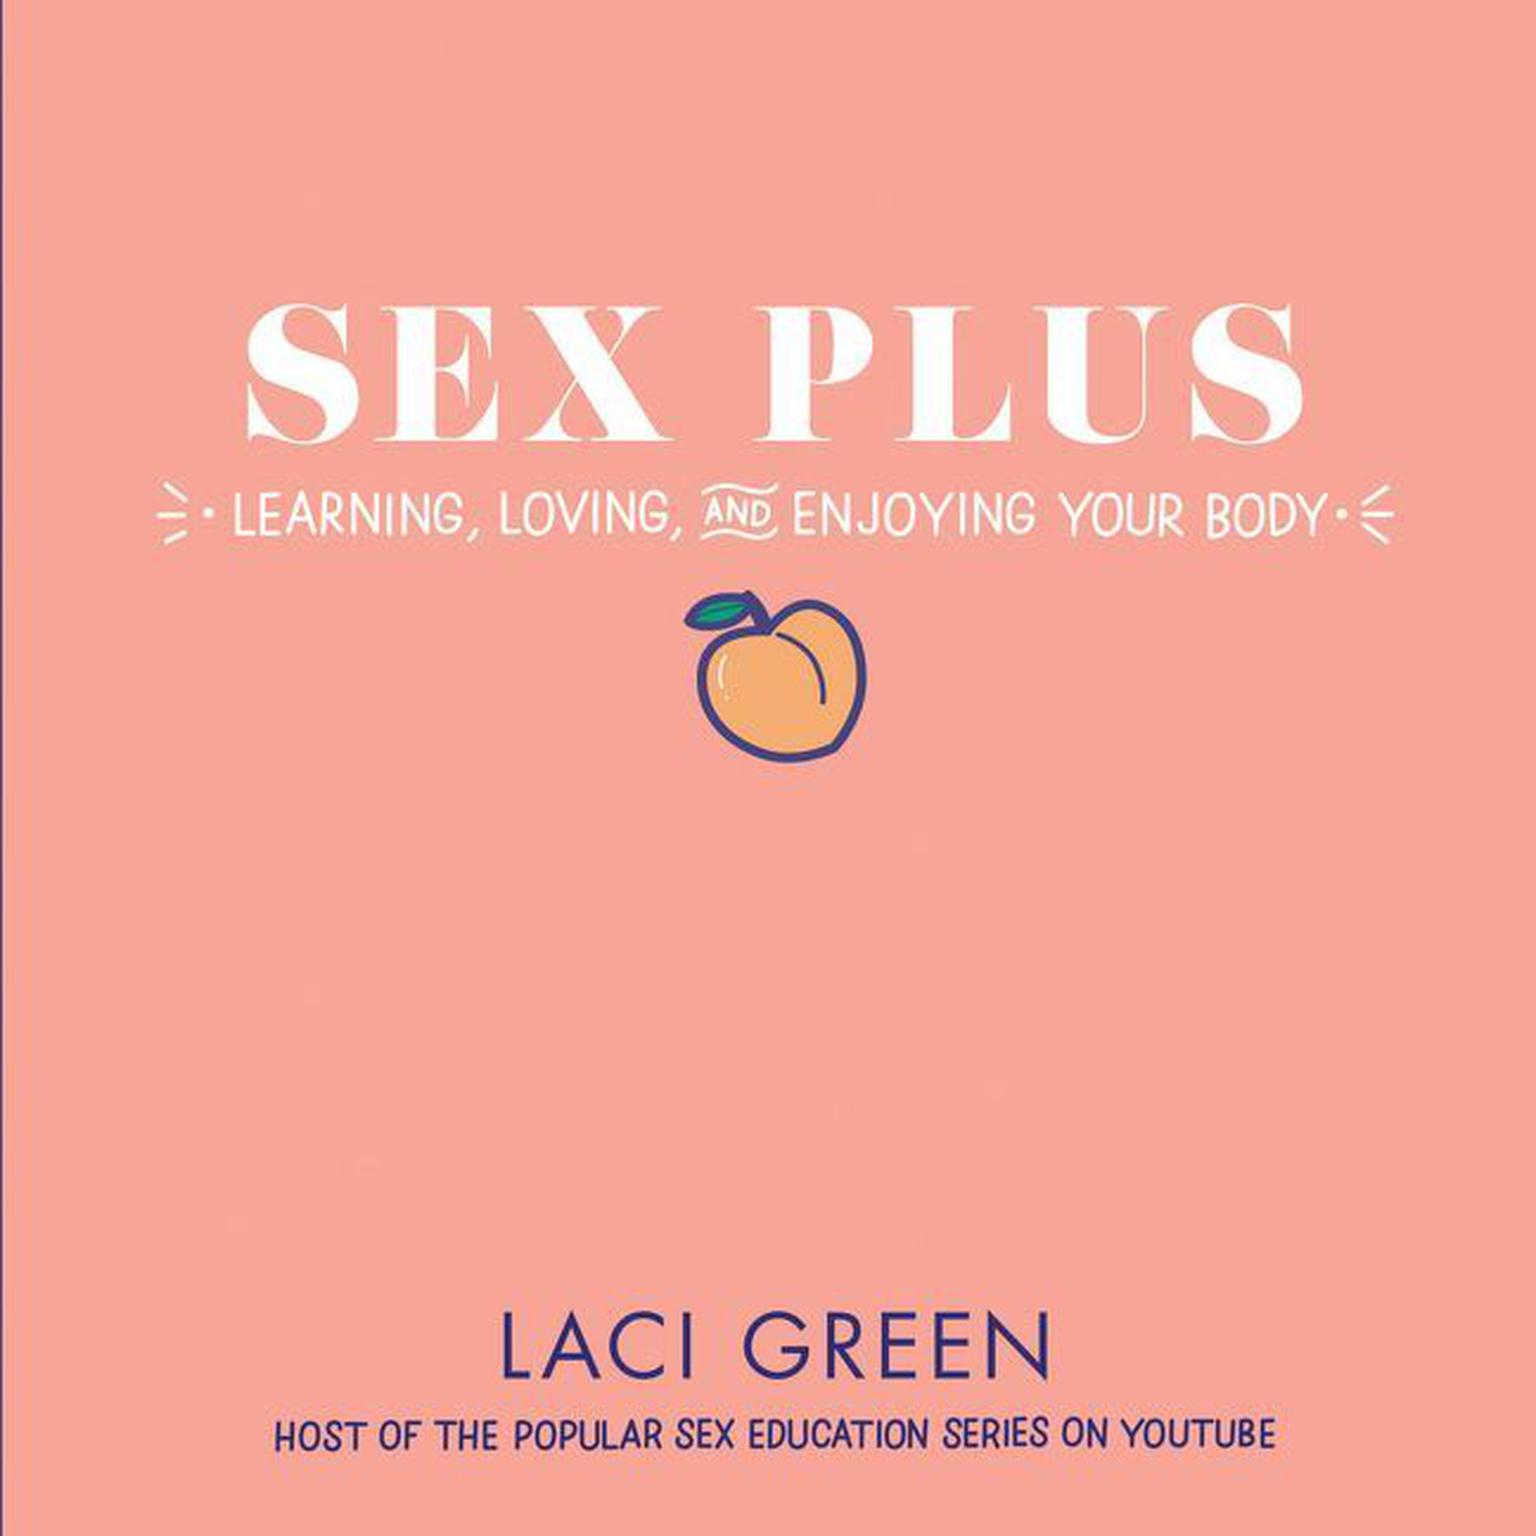 Sex Plus: Learning, Loving, and Enjoying Your Body: Learning, Loving, and Enjoying Your Body Audiobook, by Laci Green